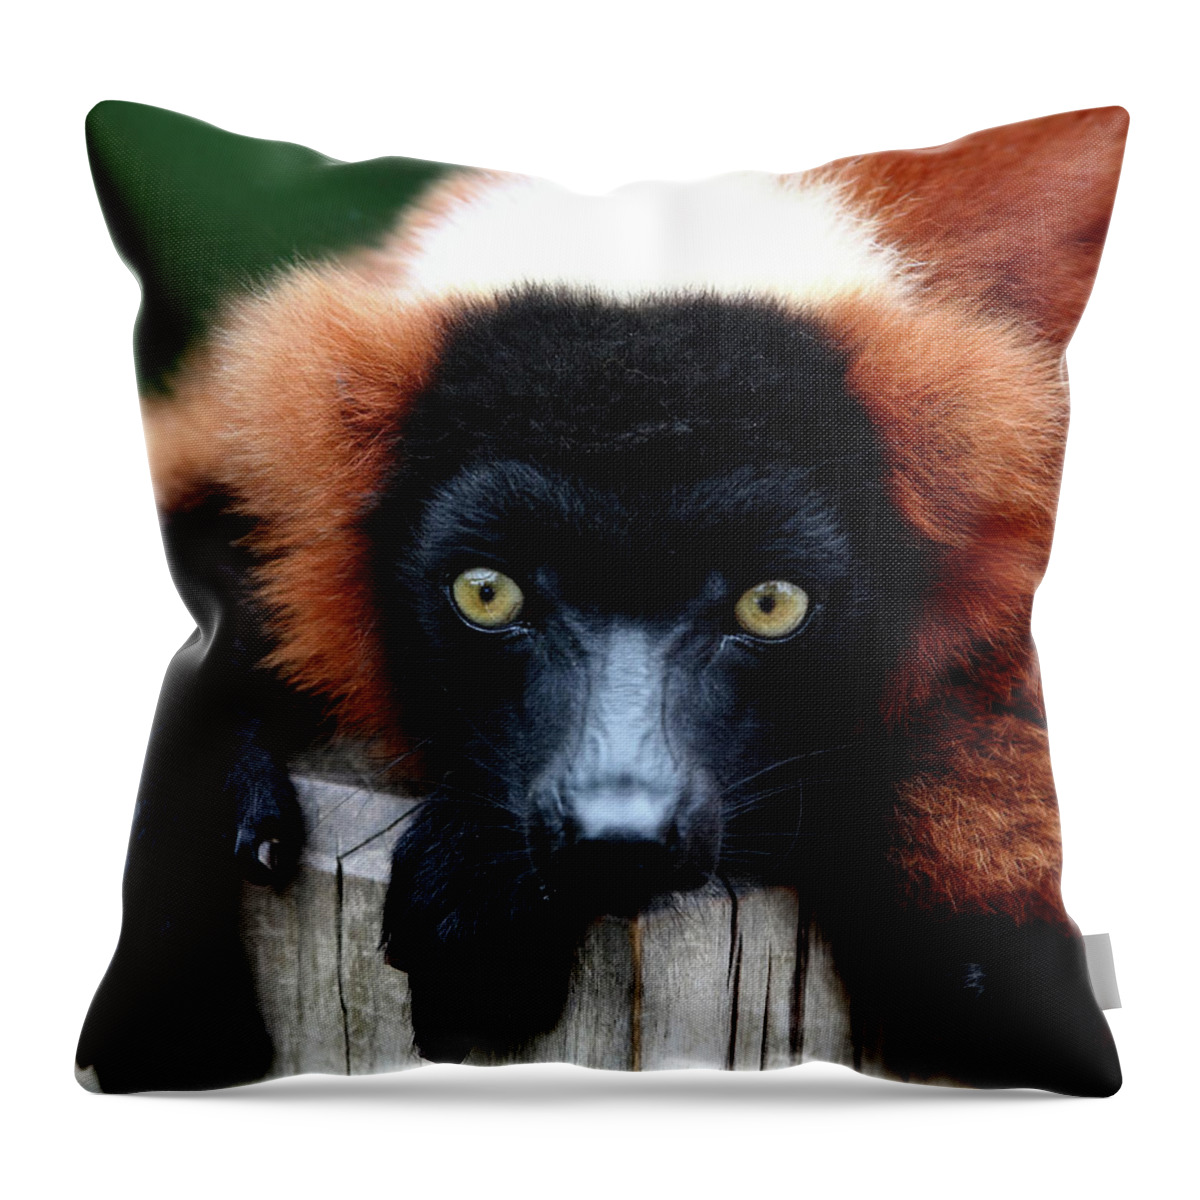 Red Ruffed Lemur Throw Pillow featuring the photograph Whatchya Lookin At by Lens Art Photography By Larry Trager